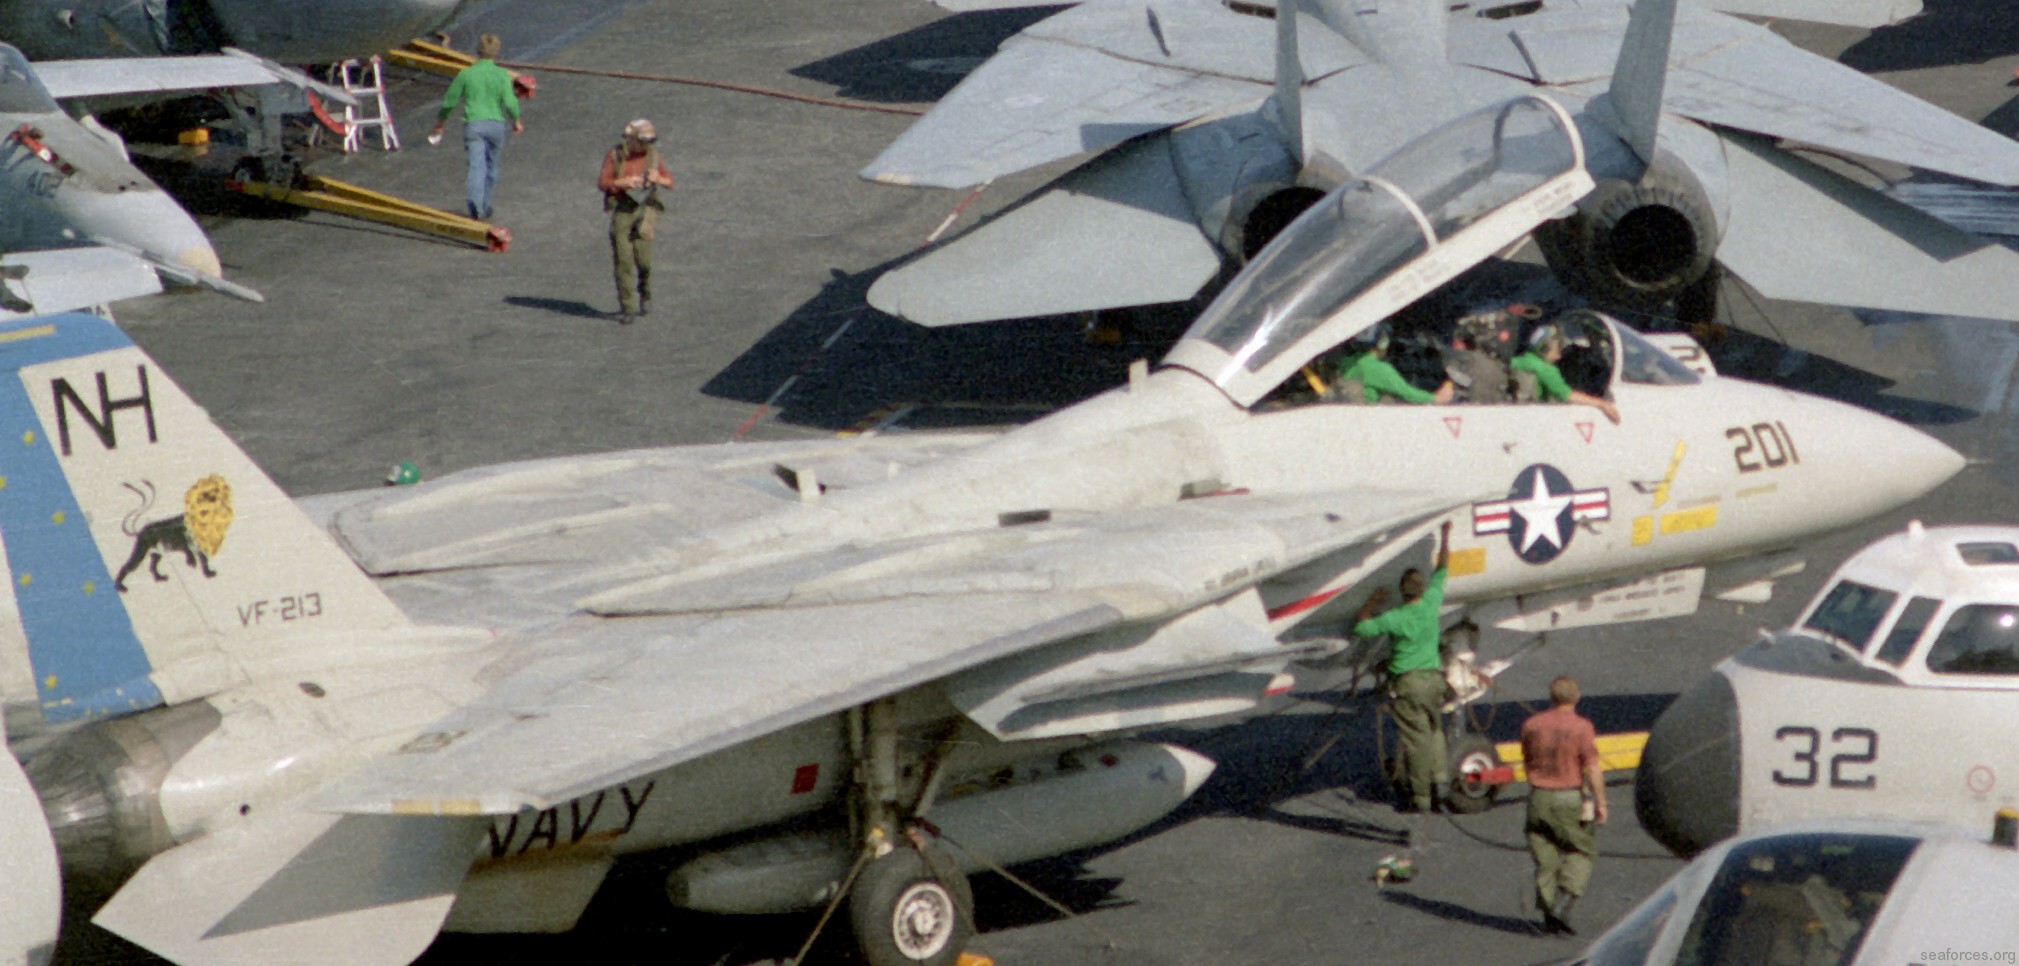 vf-213 black lions fighter squadron us navy f-14a tomcat carrier air wing cvw-11 uss abraham lincoln cvn-72 72